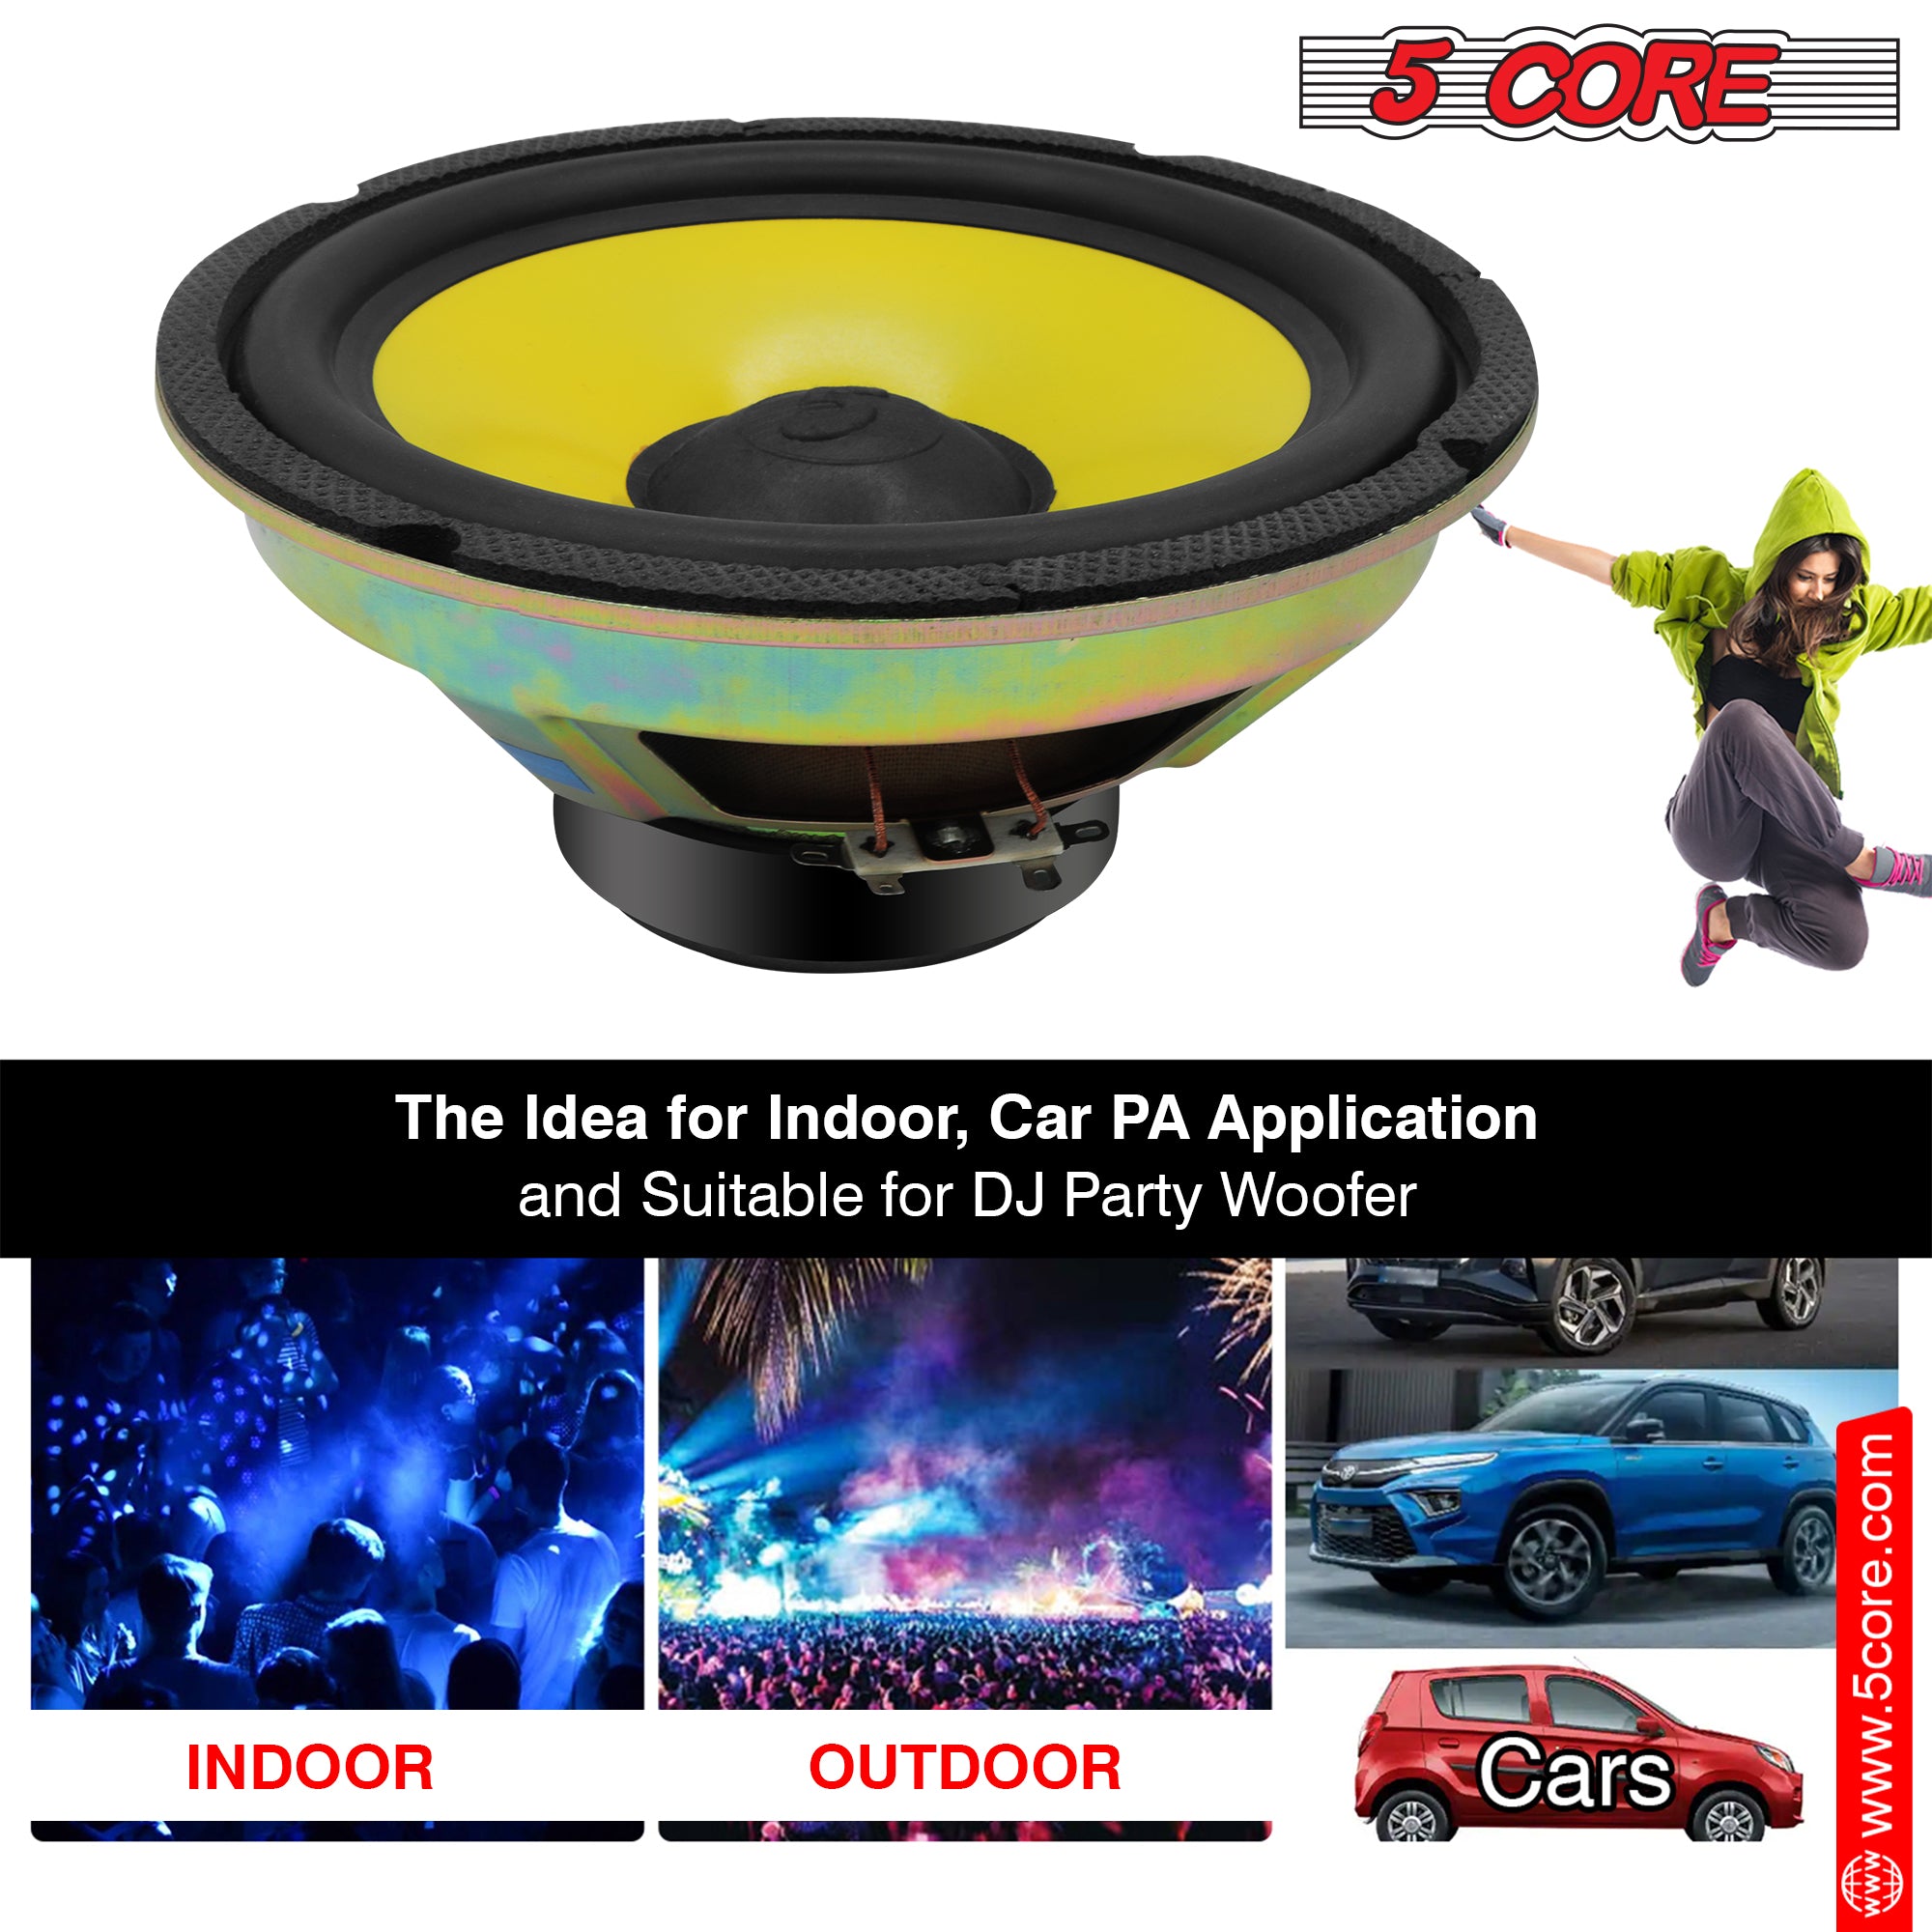 5 Core 8 Inch Subwoofer • 900W PMPO 4 Ohm Car Bass Sub Woofer • Replacement Speaker w 1" Voice Coil